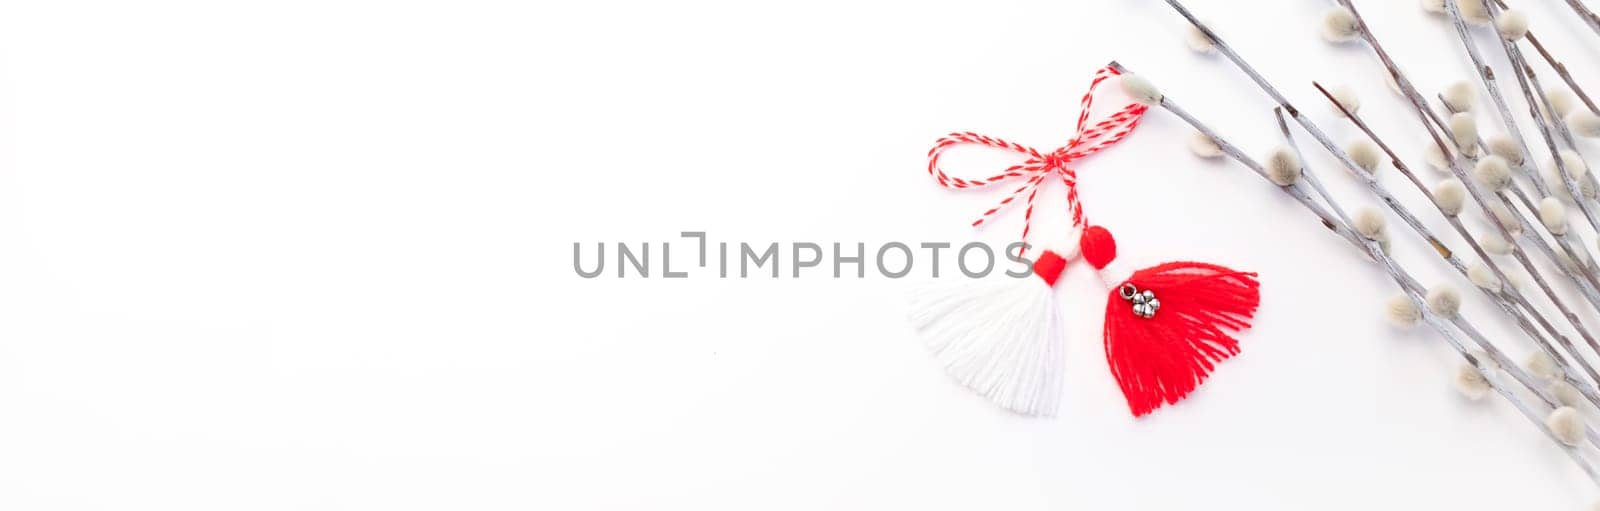 Banner Martenitsa, Baba Marta. Traditional Martisor Symbol of Holiday March 1 on White Background With Willow Twig.Grandma Marta Day Celebration In Romania,Bulgaria,Moldova. Red,white colored threads.